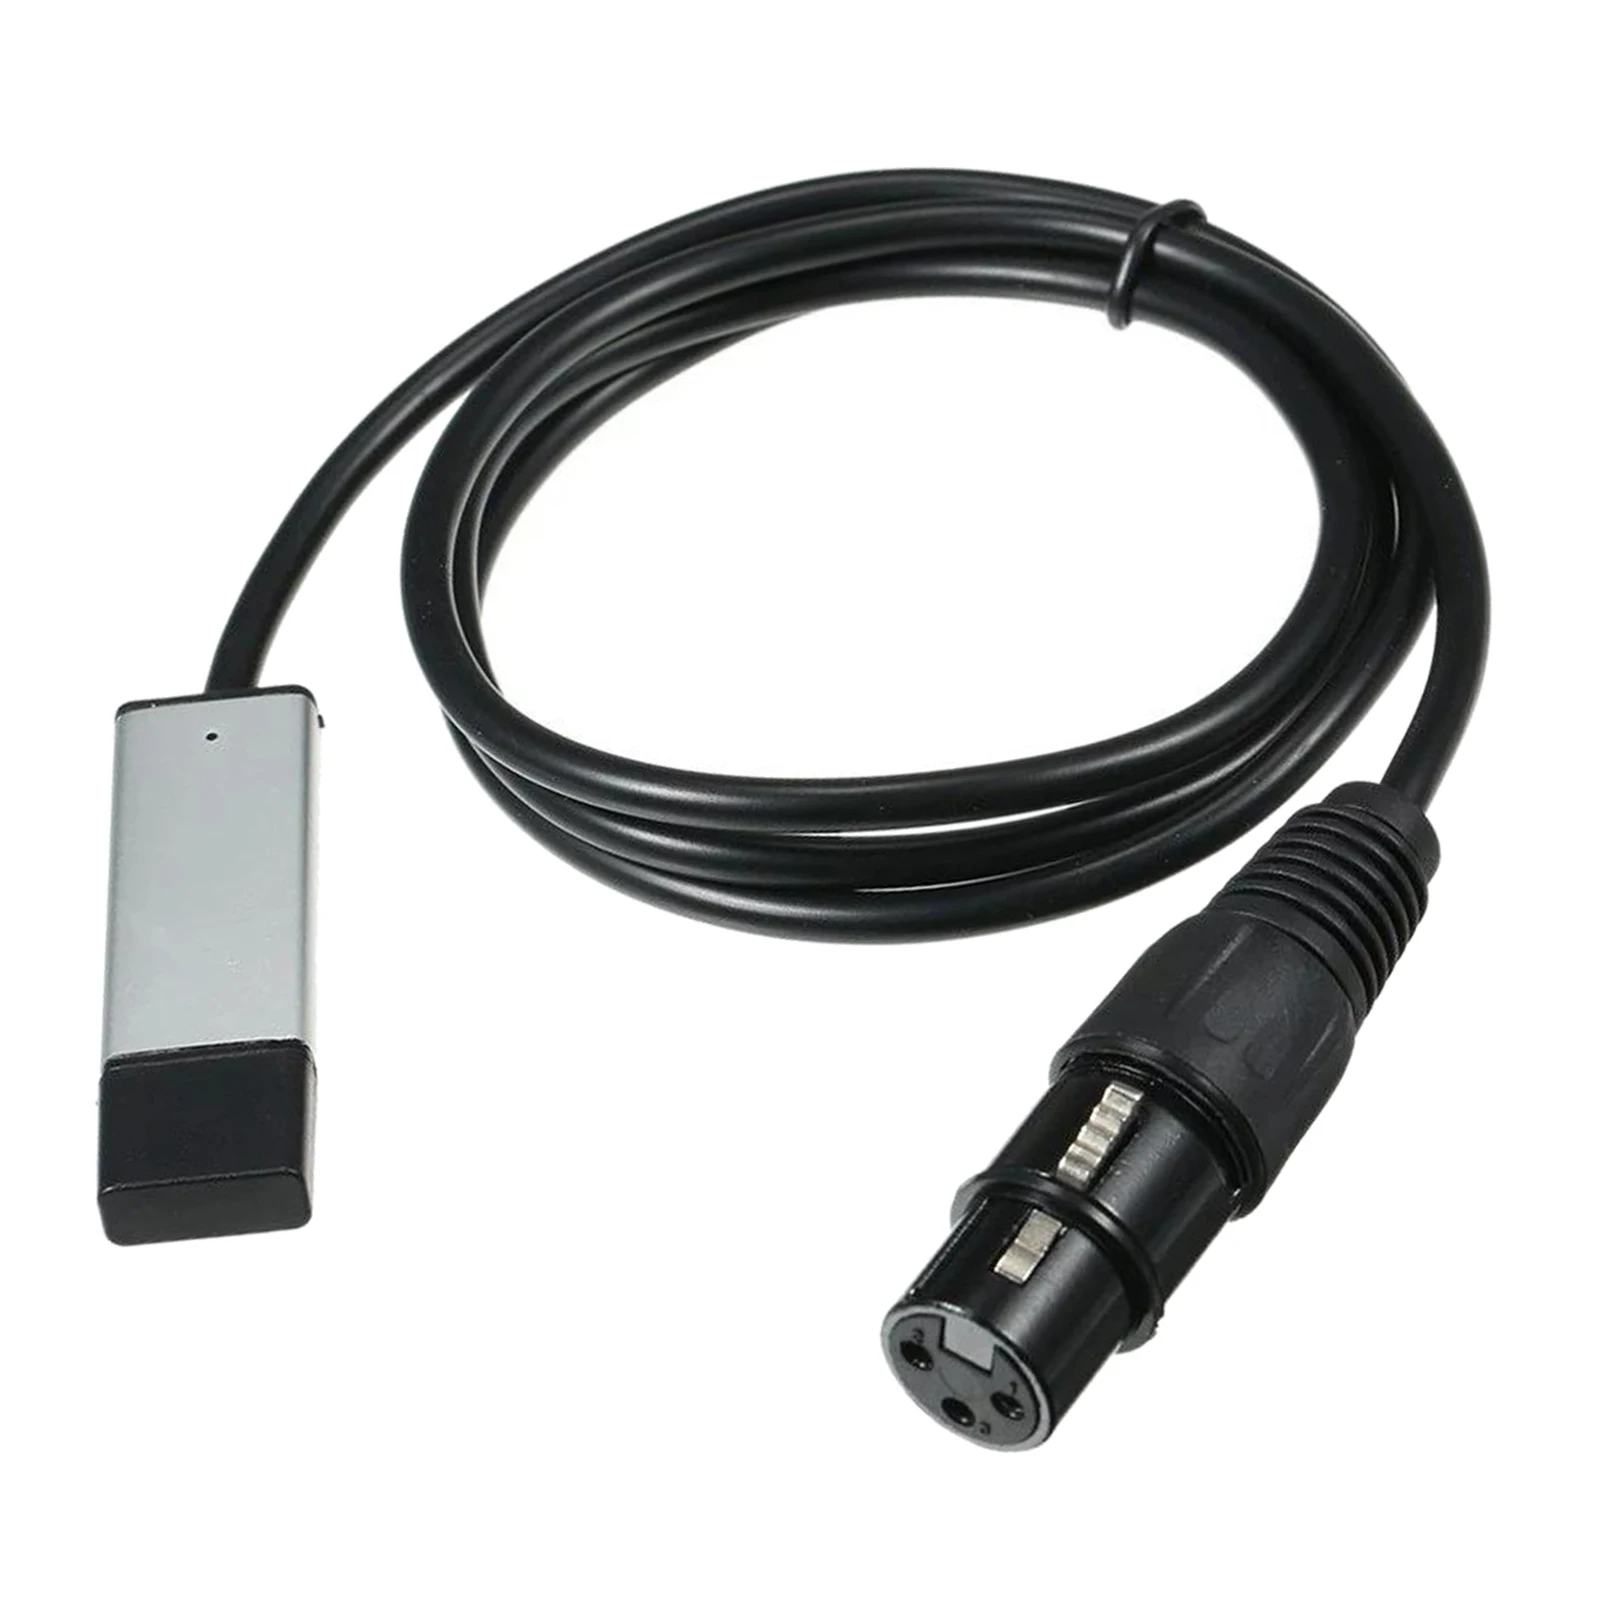 USB to DMX Control Interface Adapter Cable for Stage Lighting DMX512 Cable High Performance Portable